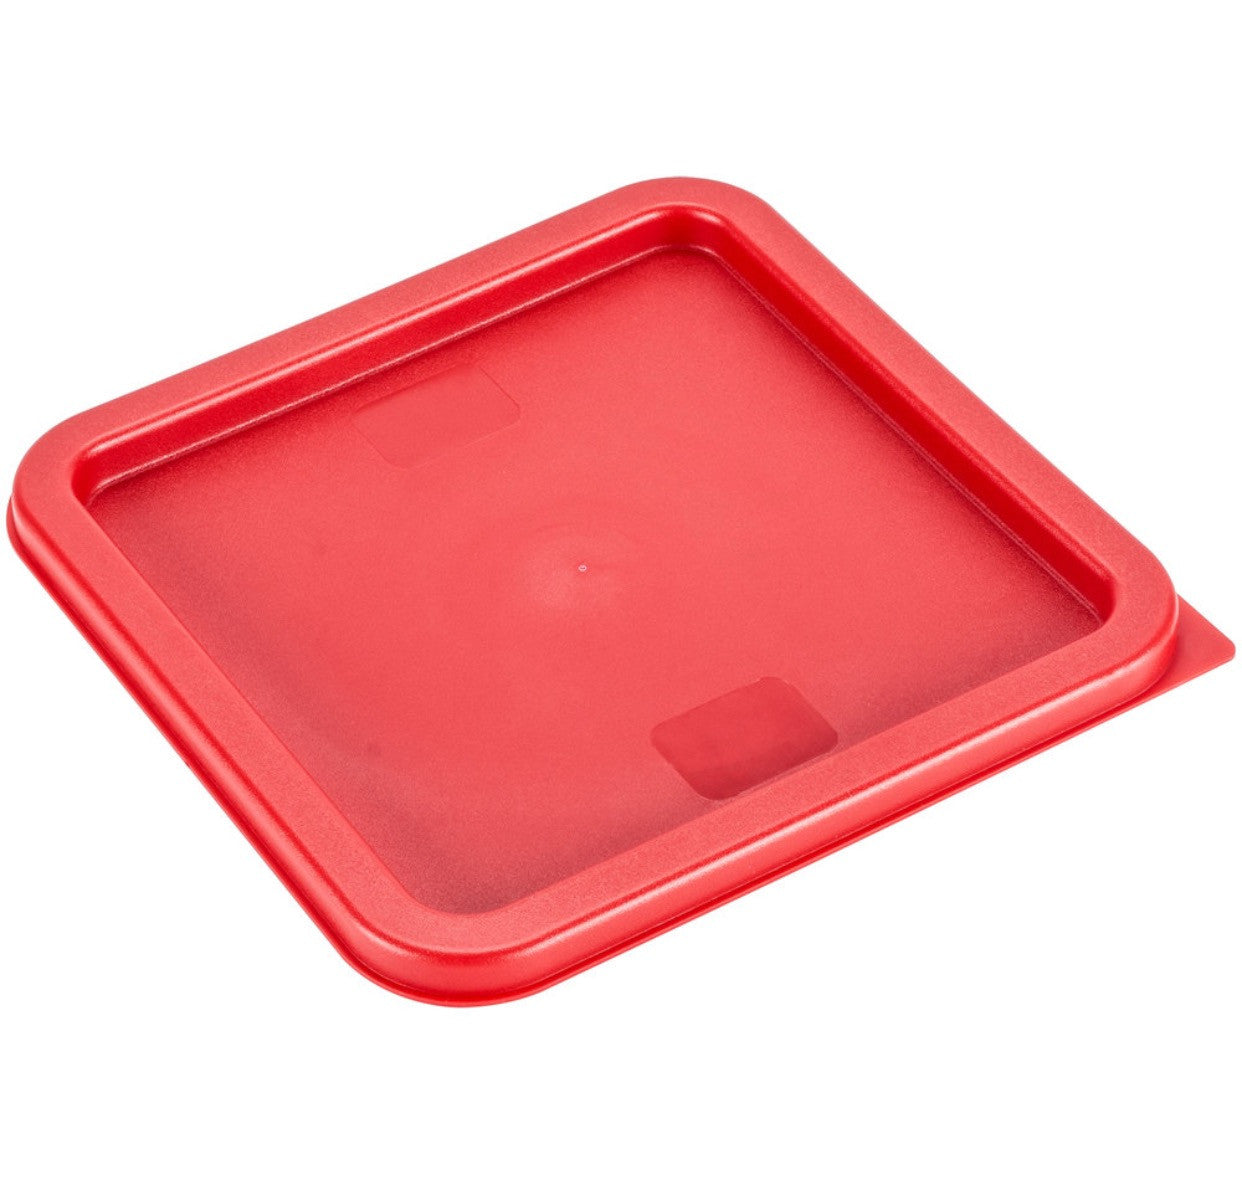 Thunder Group Polycarbonate Sqaure Food Storage, Clear, Polycarbonate - eKitchenary